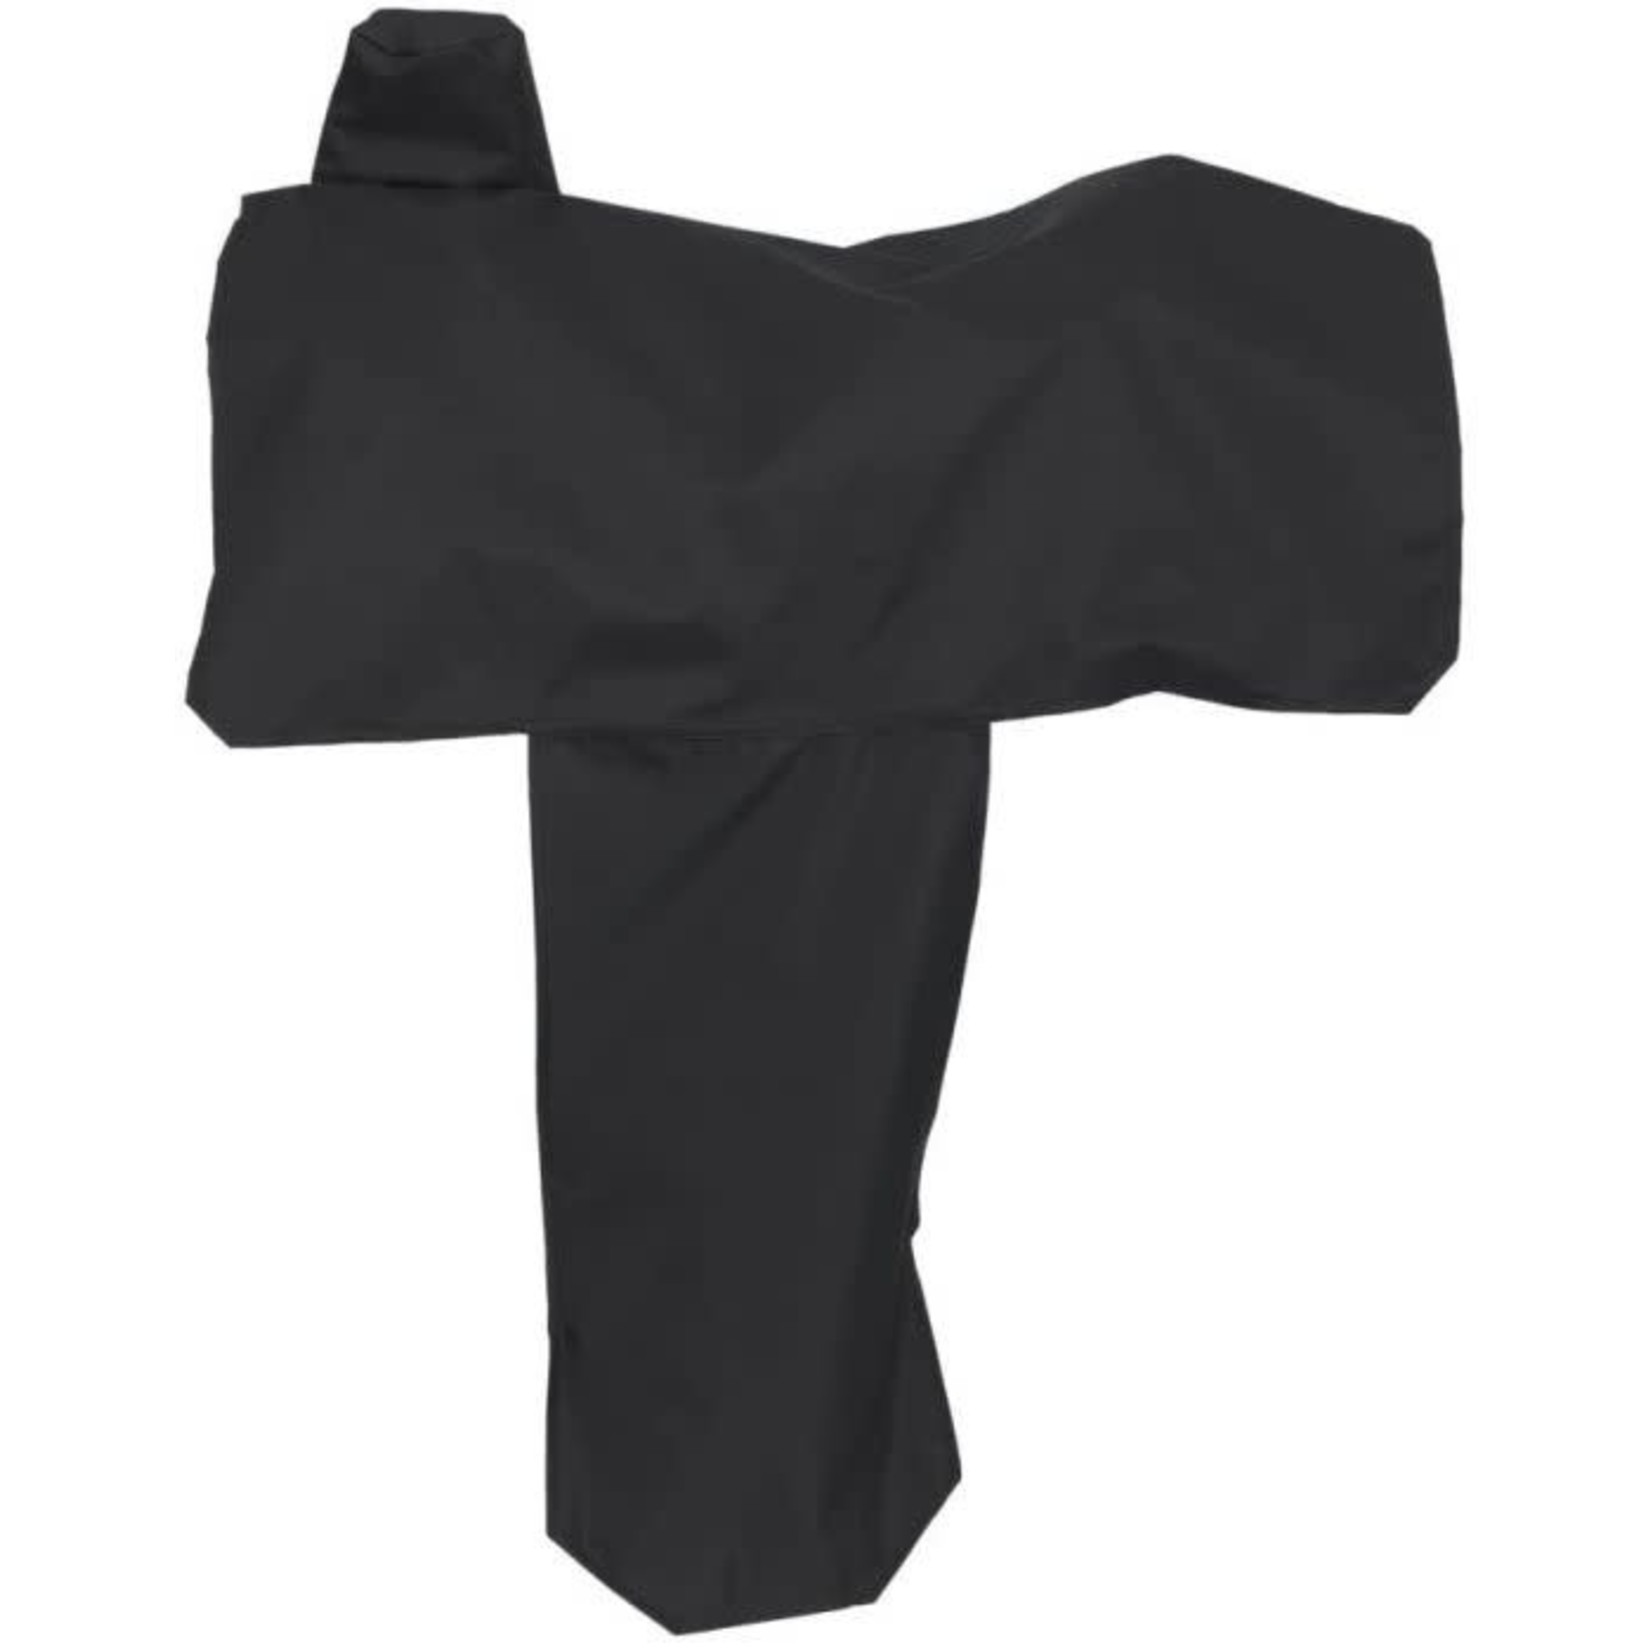 Ger-Ryan Western Saddle Cover with Elastic Edges